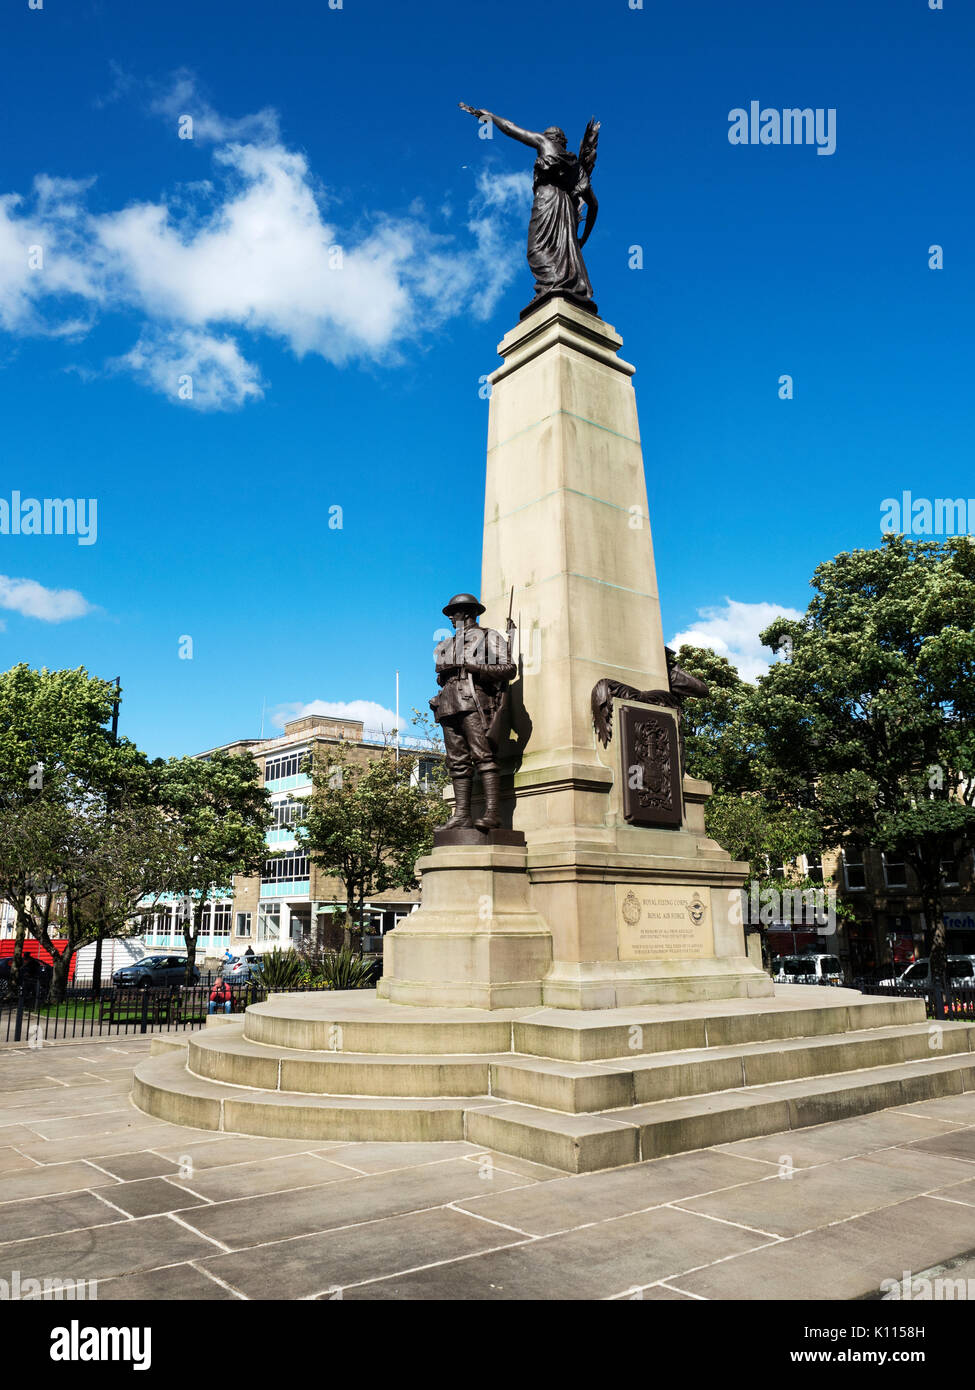 Memoriale di guerra a Keighley West Yorkshire Inghilterra Foto Stock